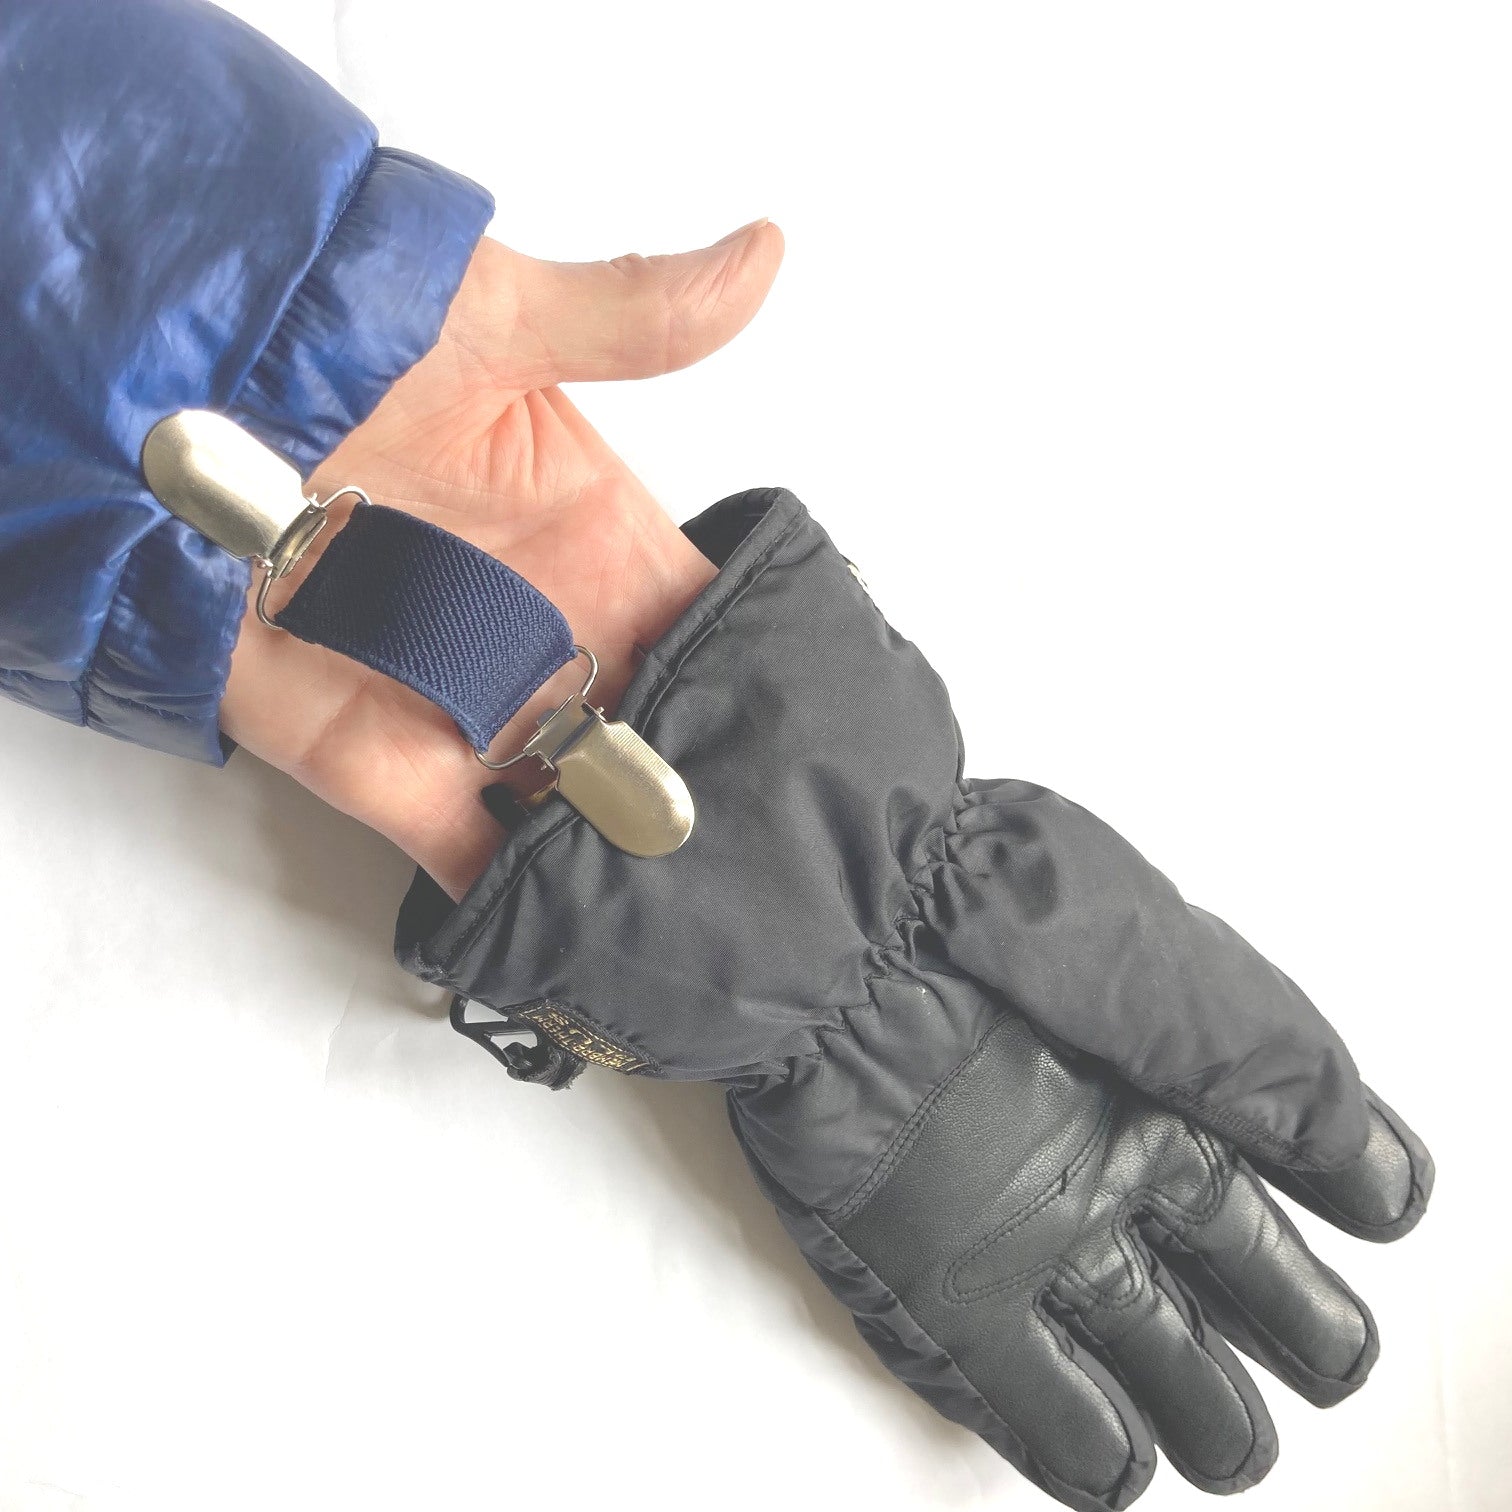 Close up of a navy Clip2Cuff attached to a cuff at one end and a glove at the other end of the elastic strap